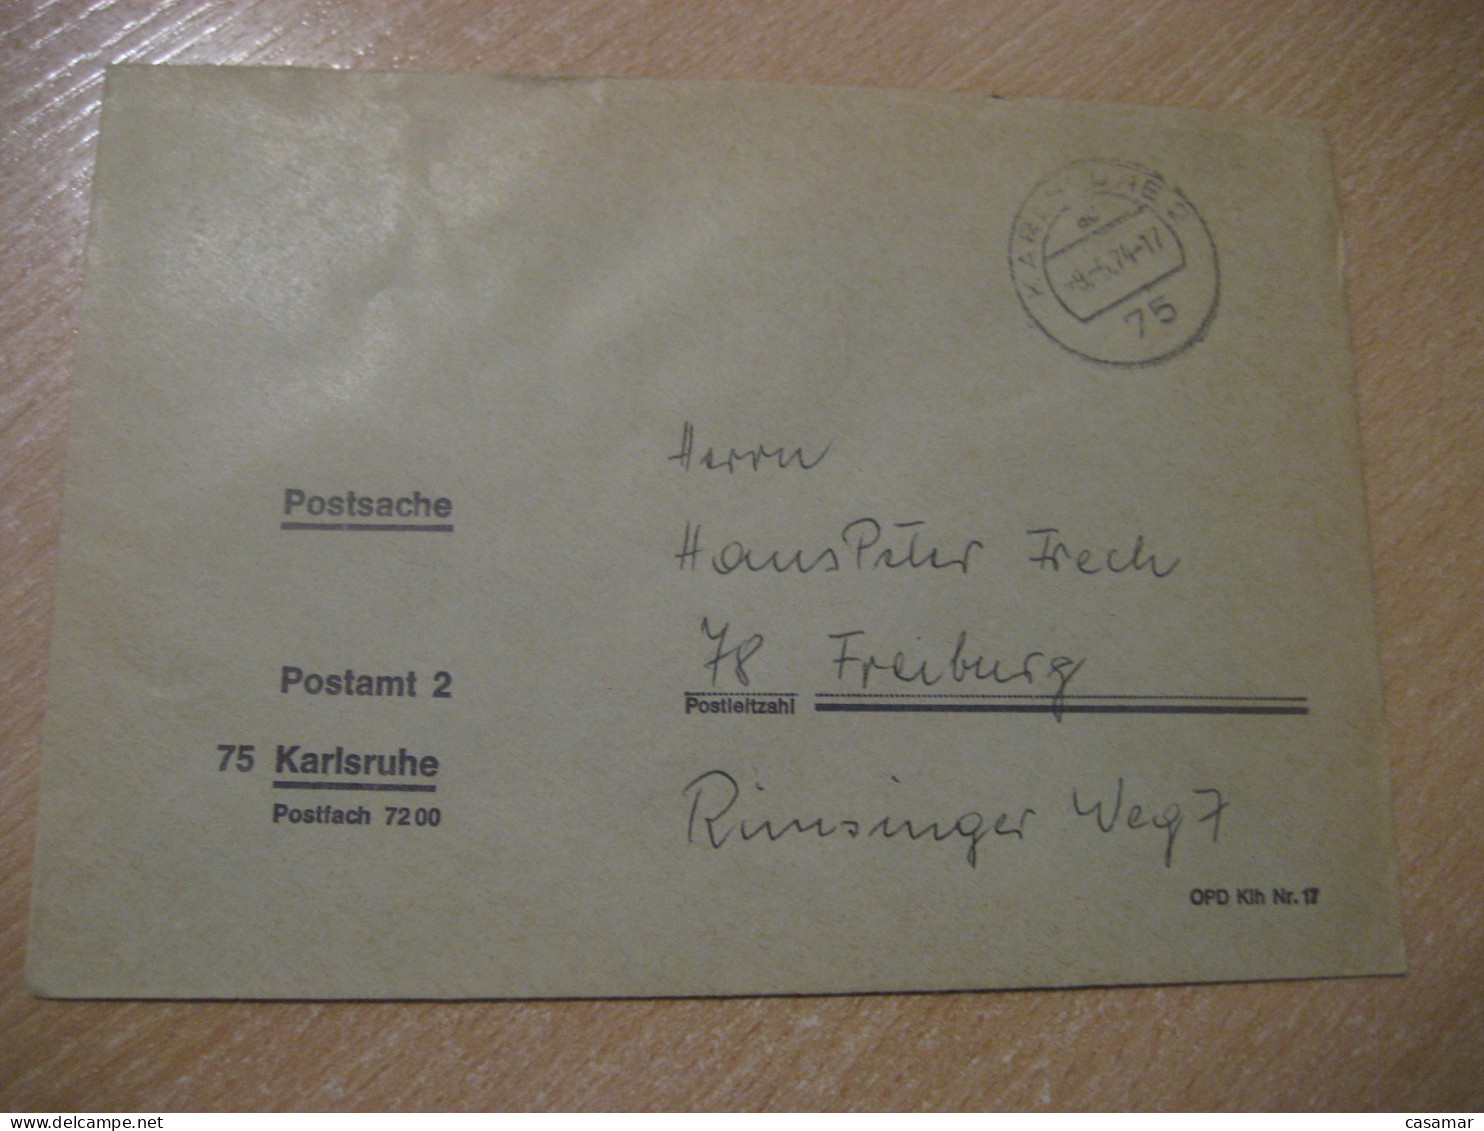 KARLSRUHE 1974 To Freiburg Postage Paid Cancel Cover GERMANY - Covers & Documents